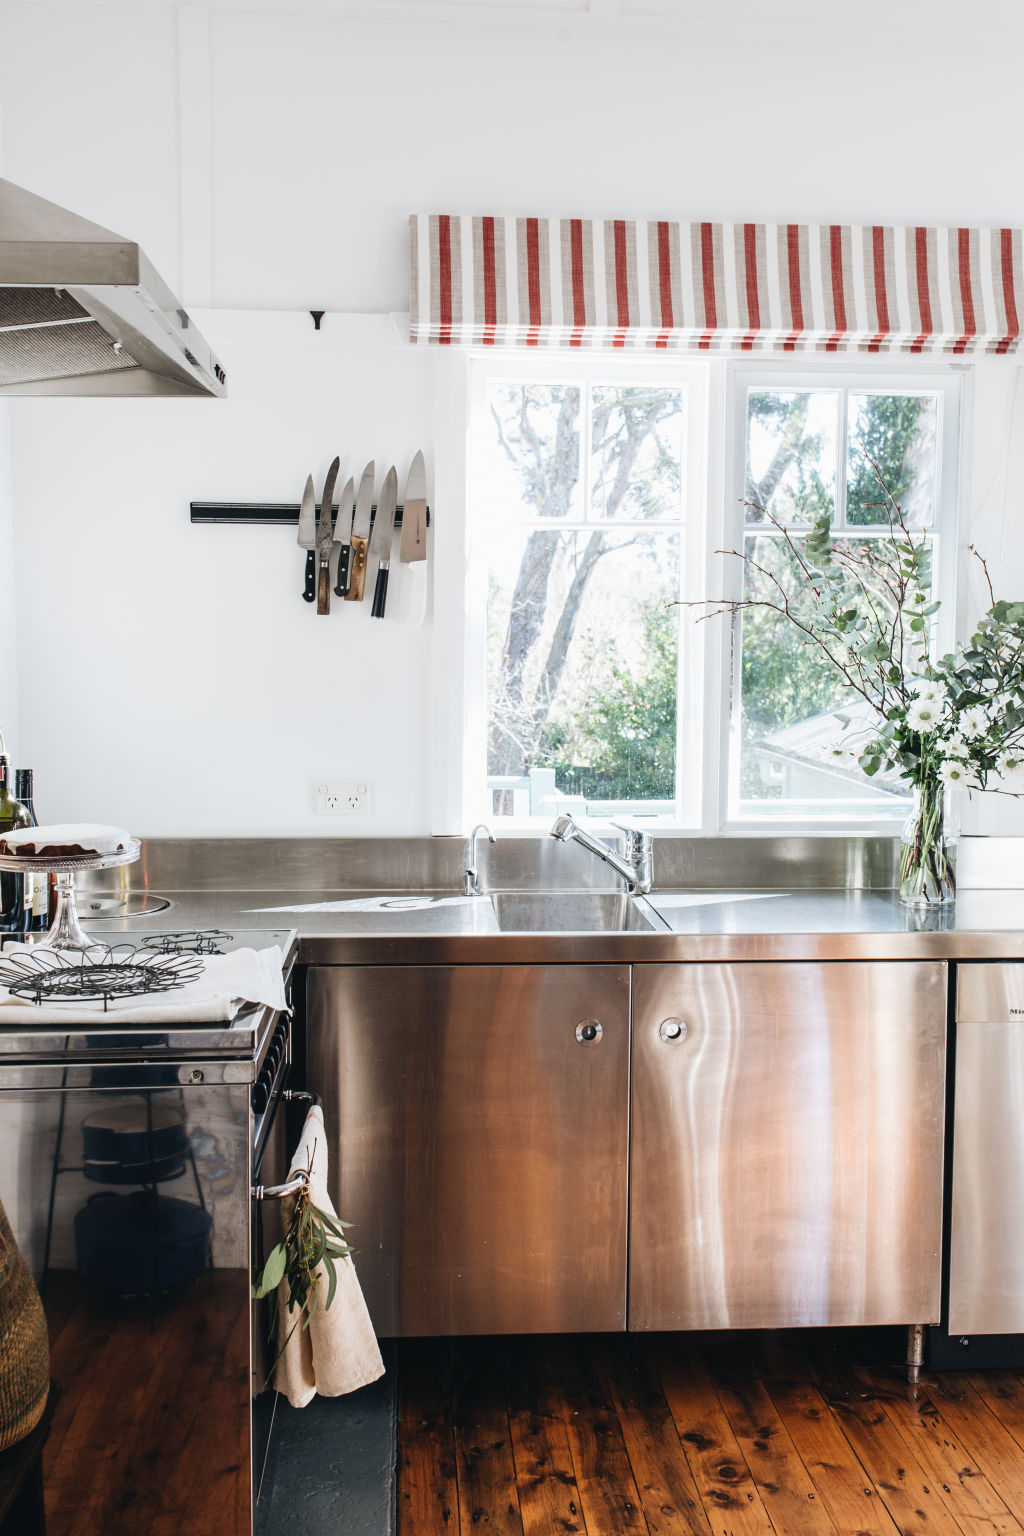 Homemade scones are often found waiting on the kitchen bench. Photo: Abbie Melle